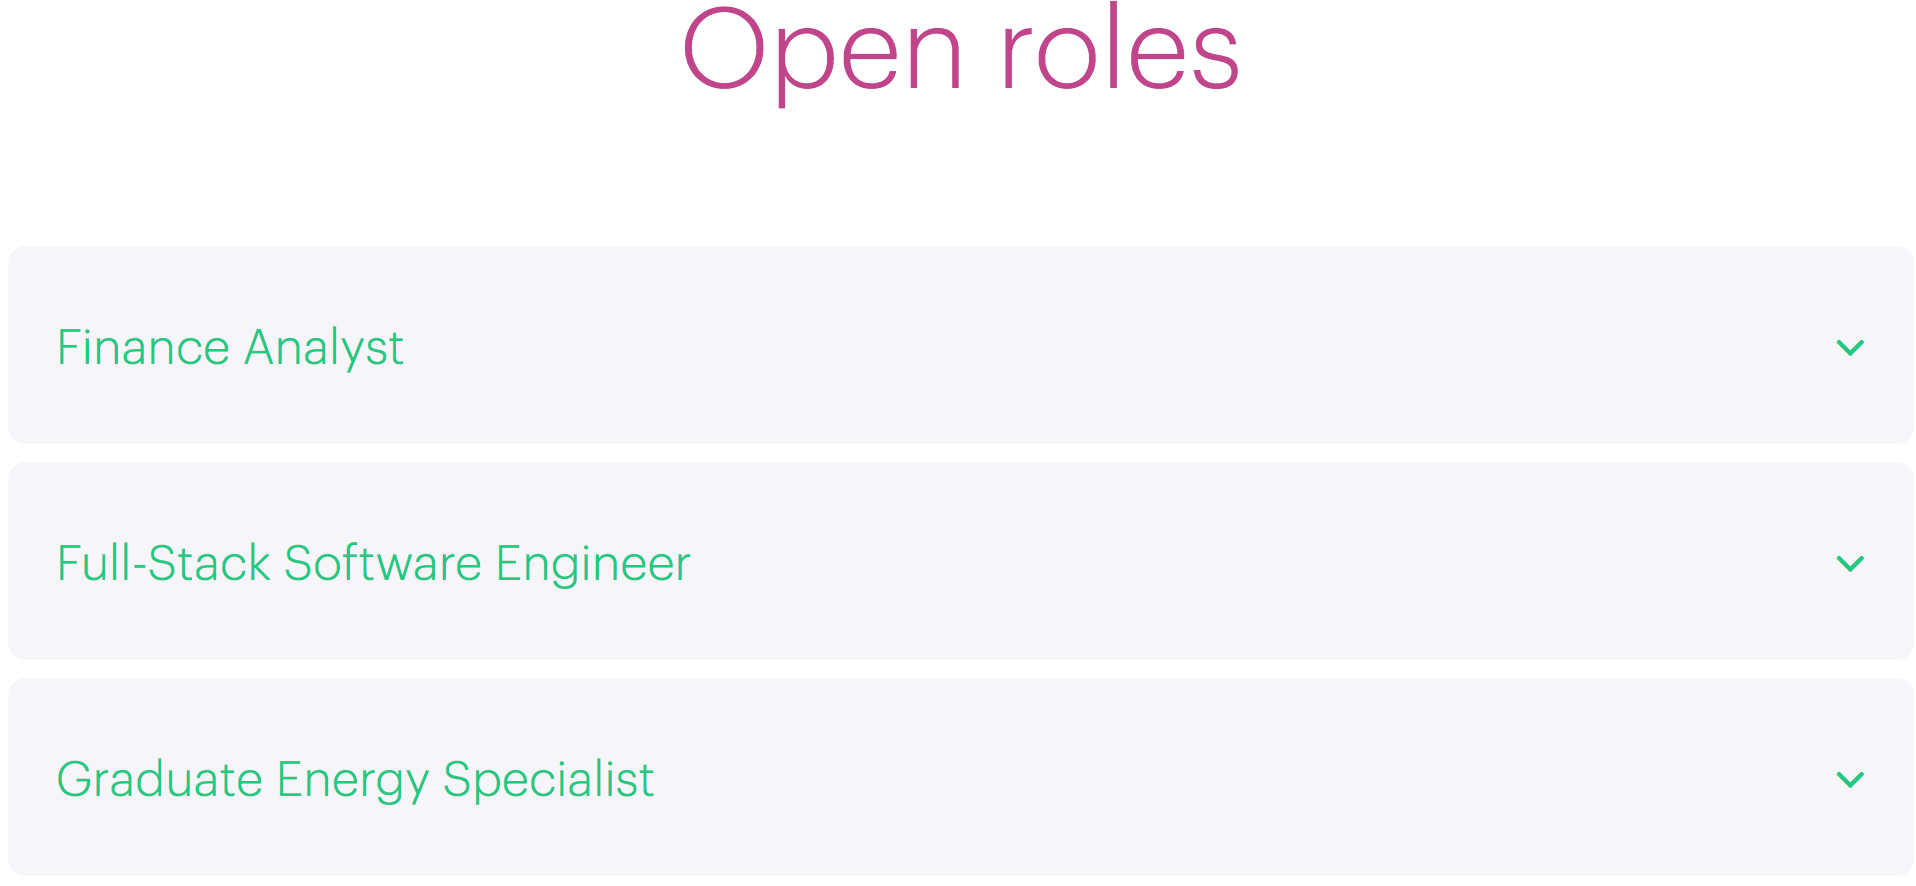 Open roles section